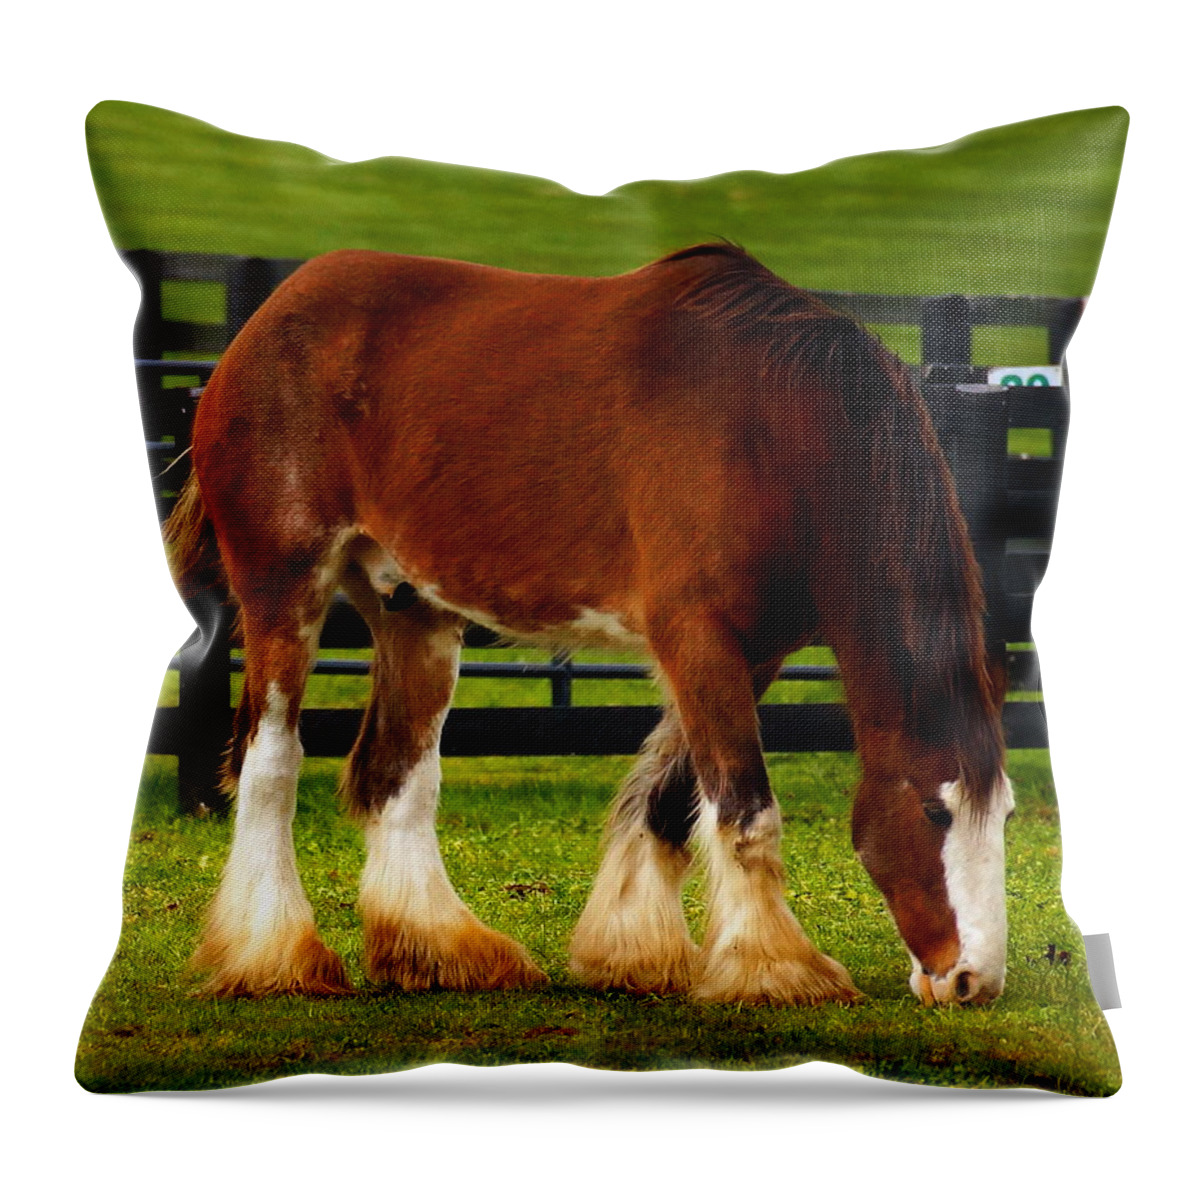 Horses Throw Pillow featuring the photograph Just Another Day by Beth Collins